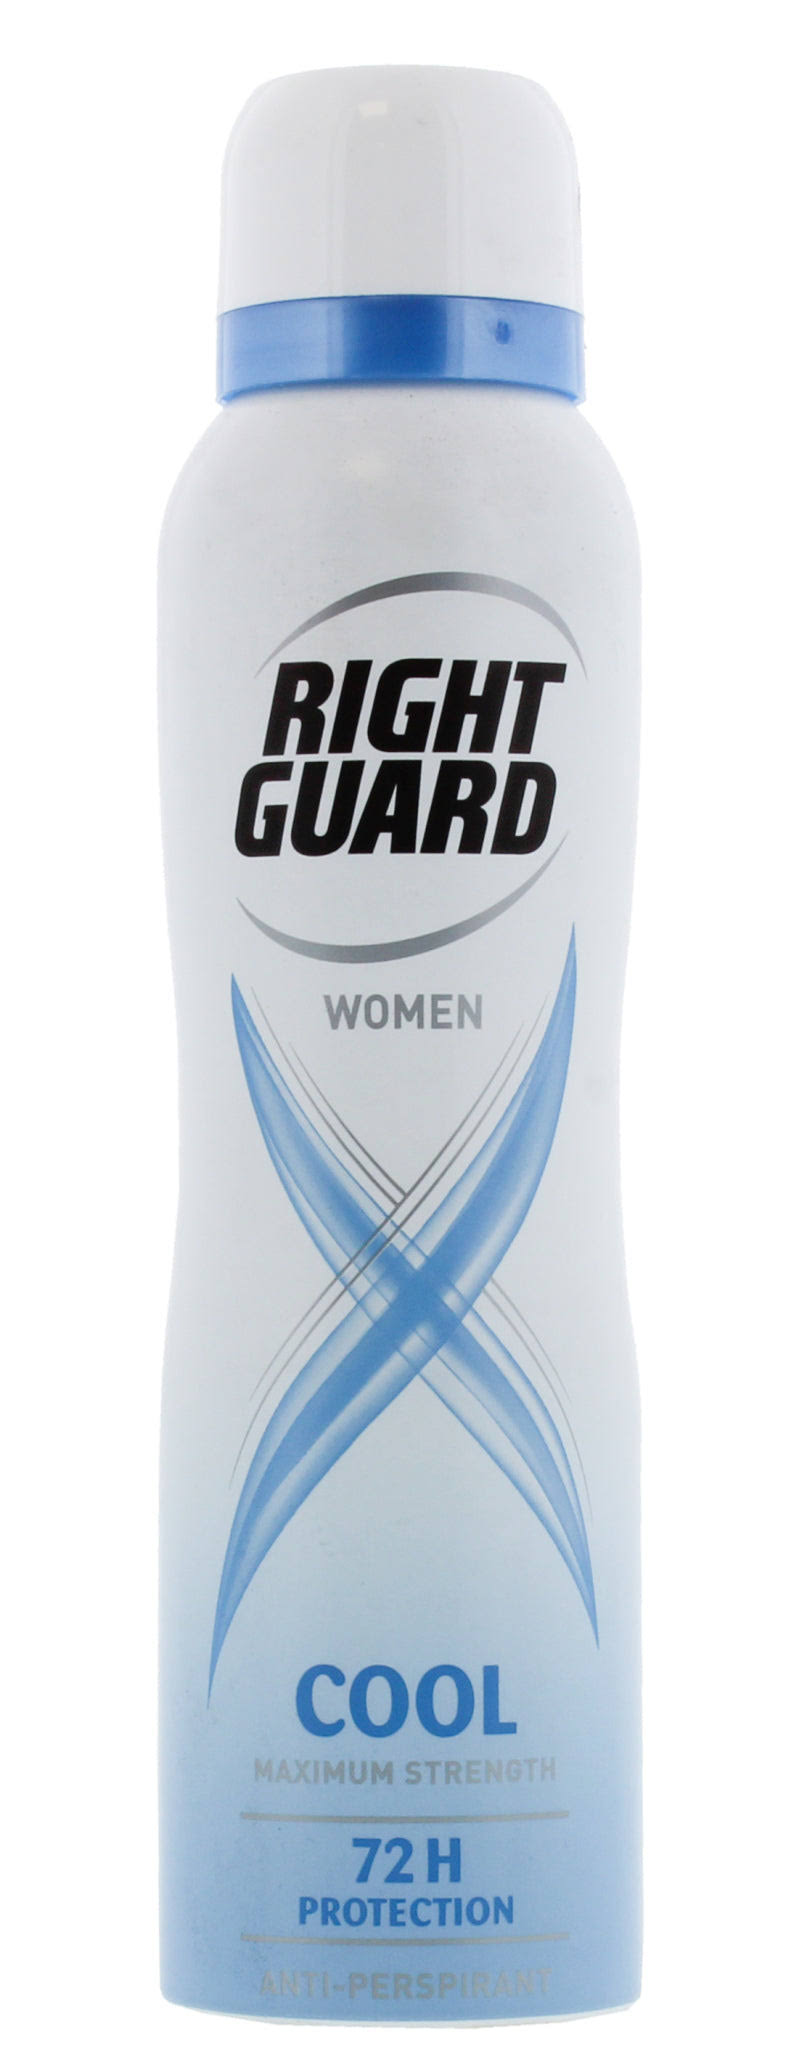 Right Guard Xtreme Women 72H Protection Anti-Perspirant - Cool, 150ml